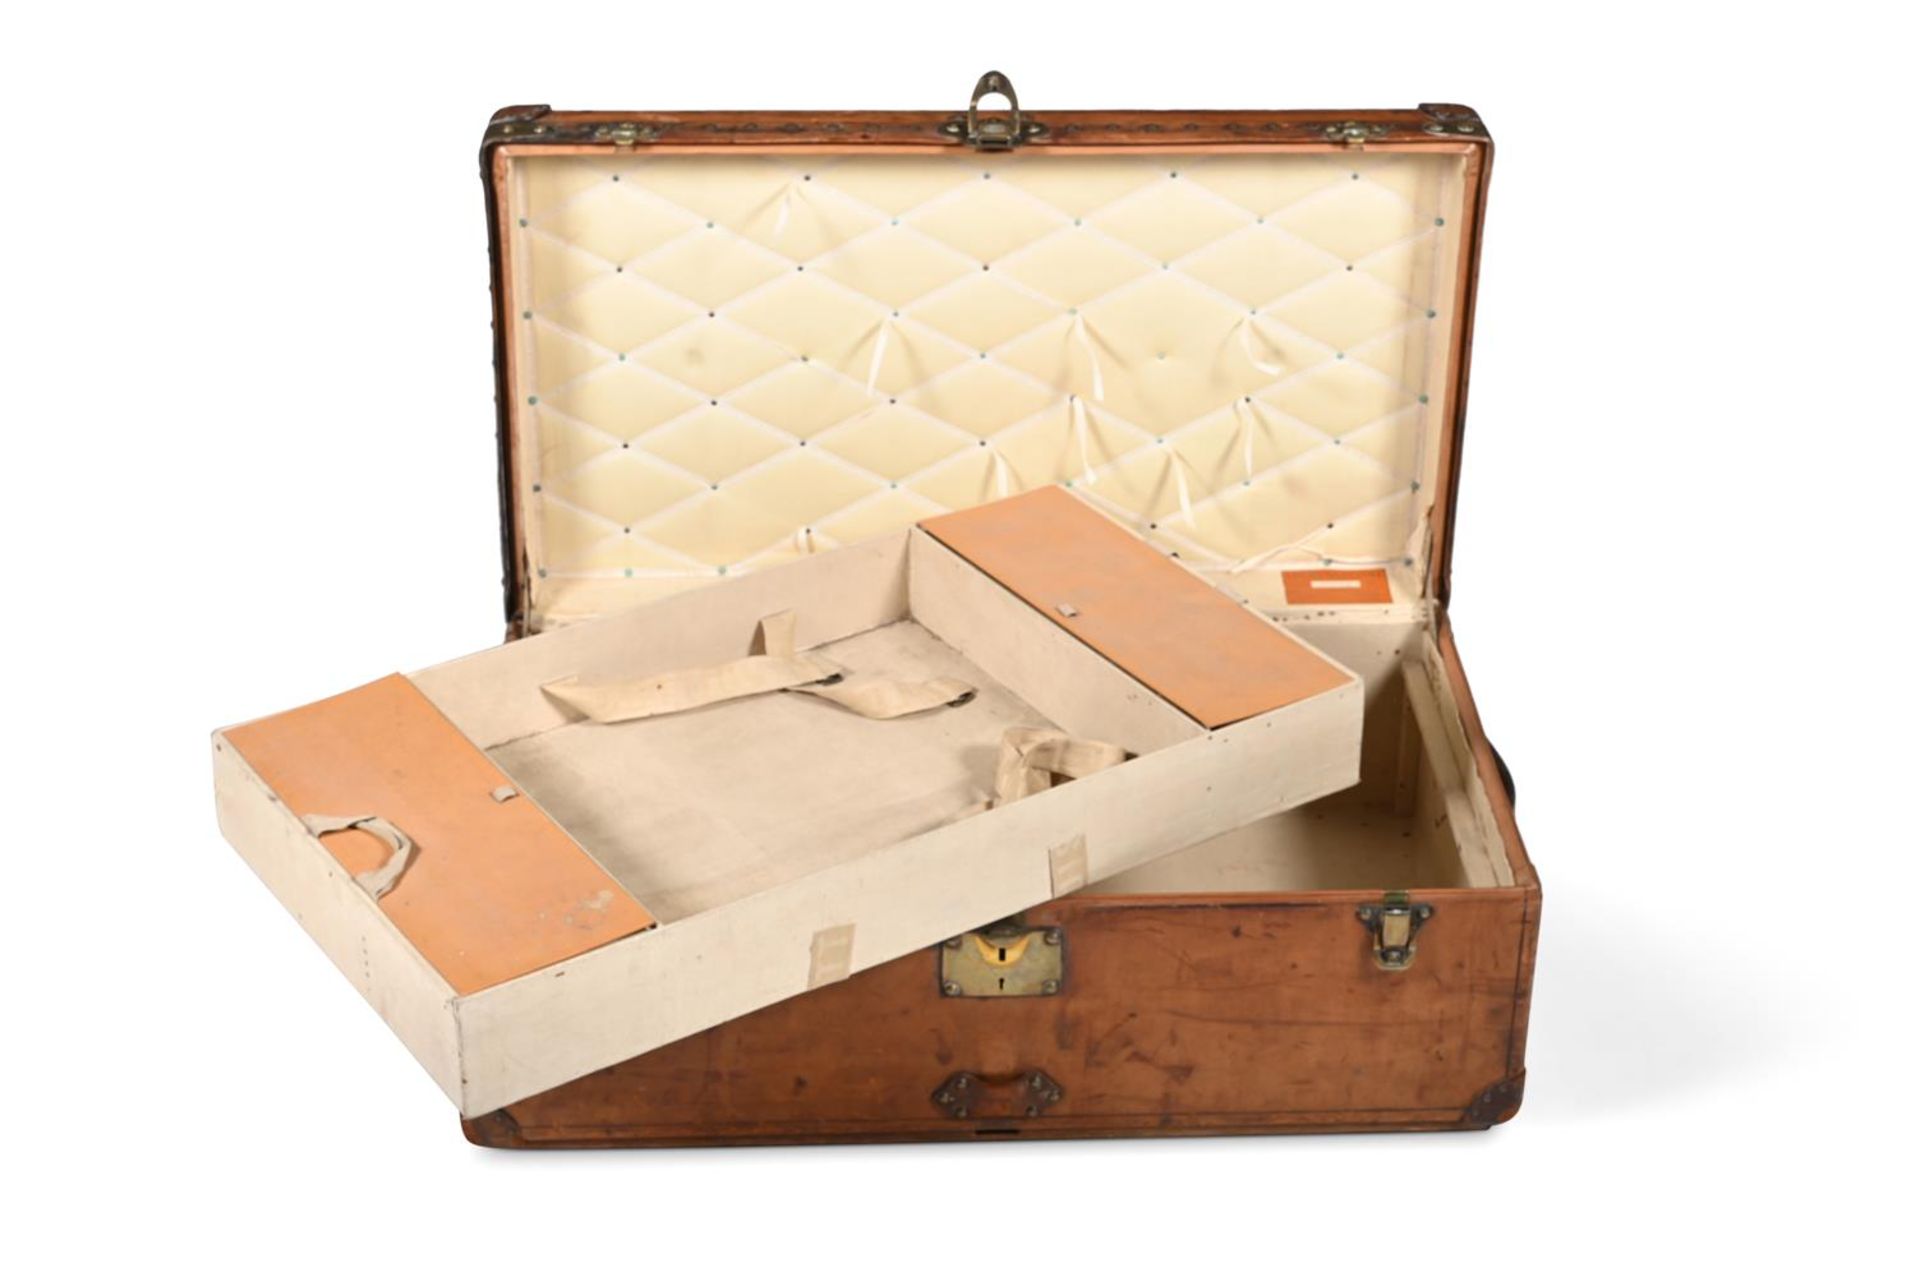 LOUIS VUITTON, A BROWN LEATHER HARD SUITCASE - Image 4 of 5